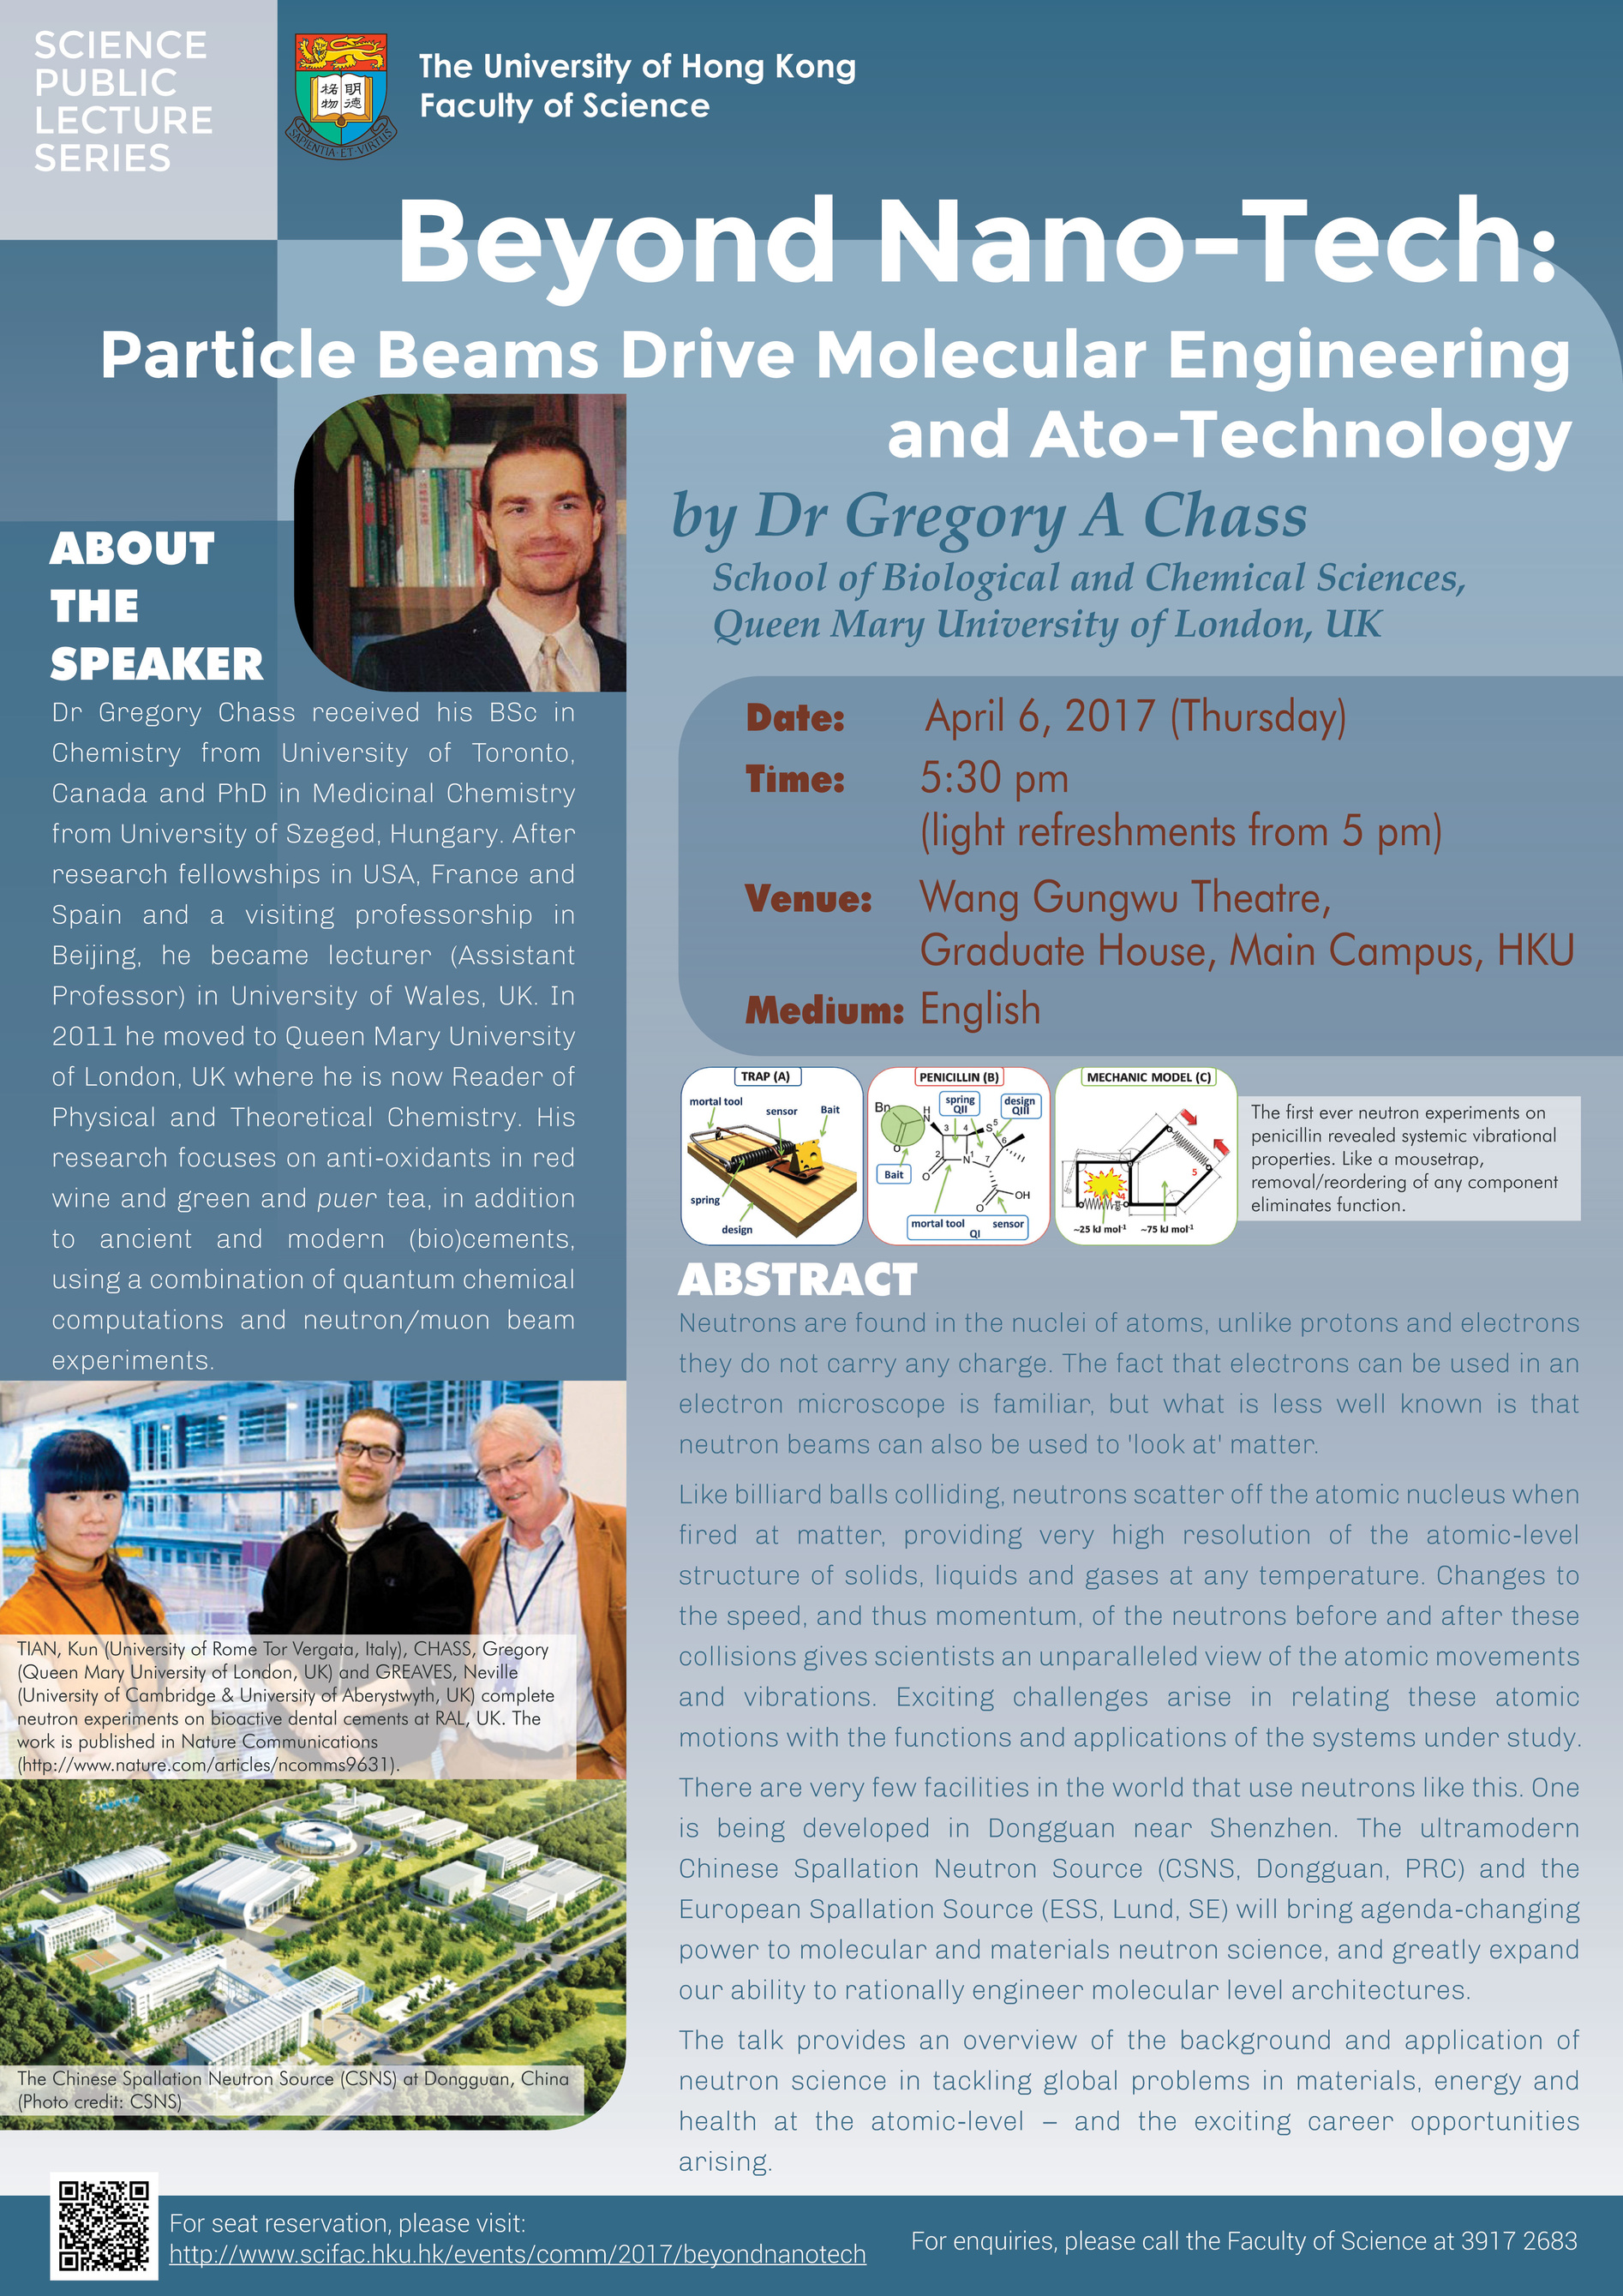 Public Lecture: Beyond Nano-Tech: Particle Beams Drive Molecular Engineering and Ato-Technology